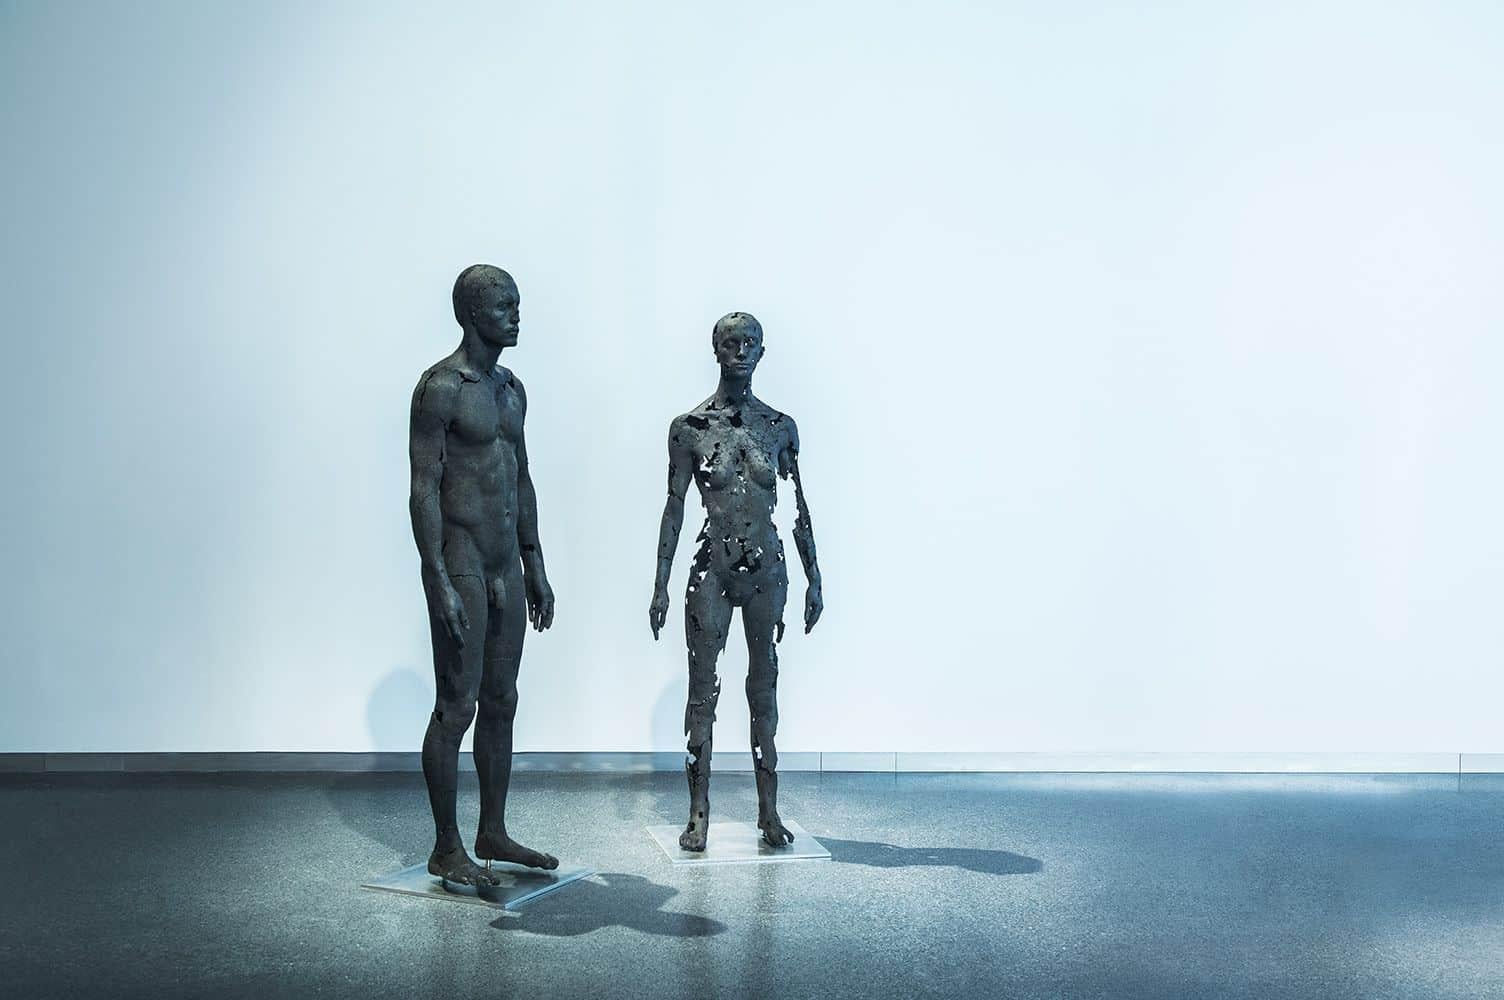 The Presence of Absence - Male (I) by Tom Price - Sculpture en charbon, corps nu en vente 1